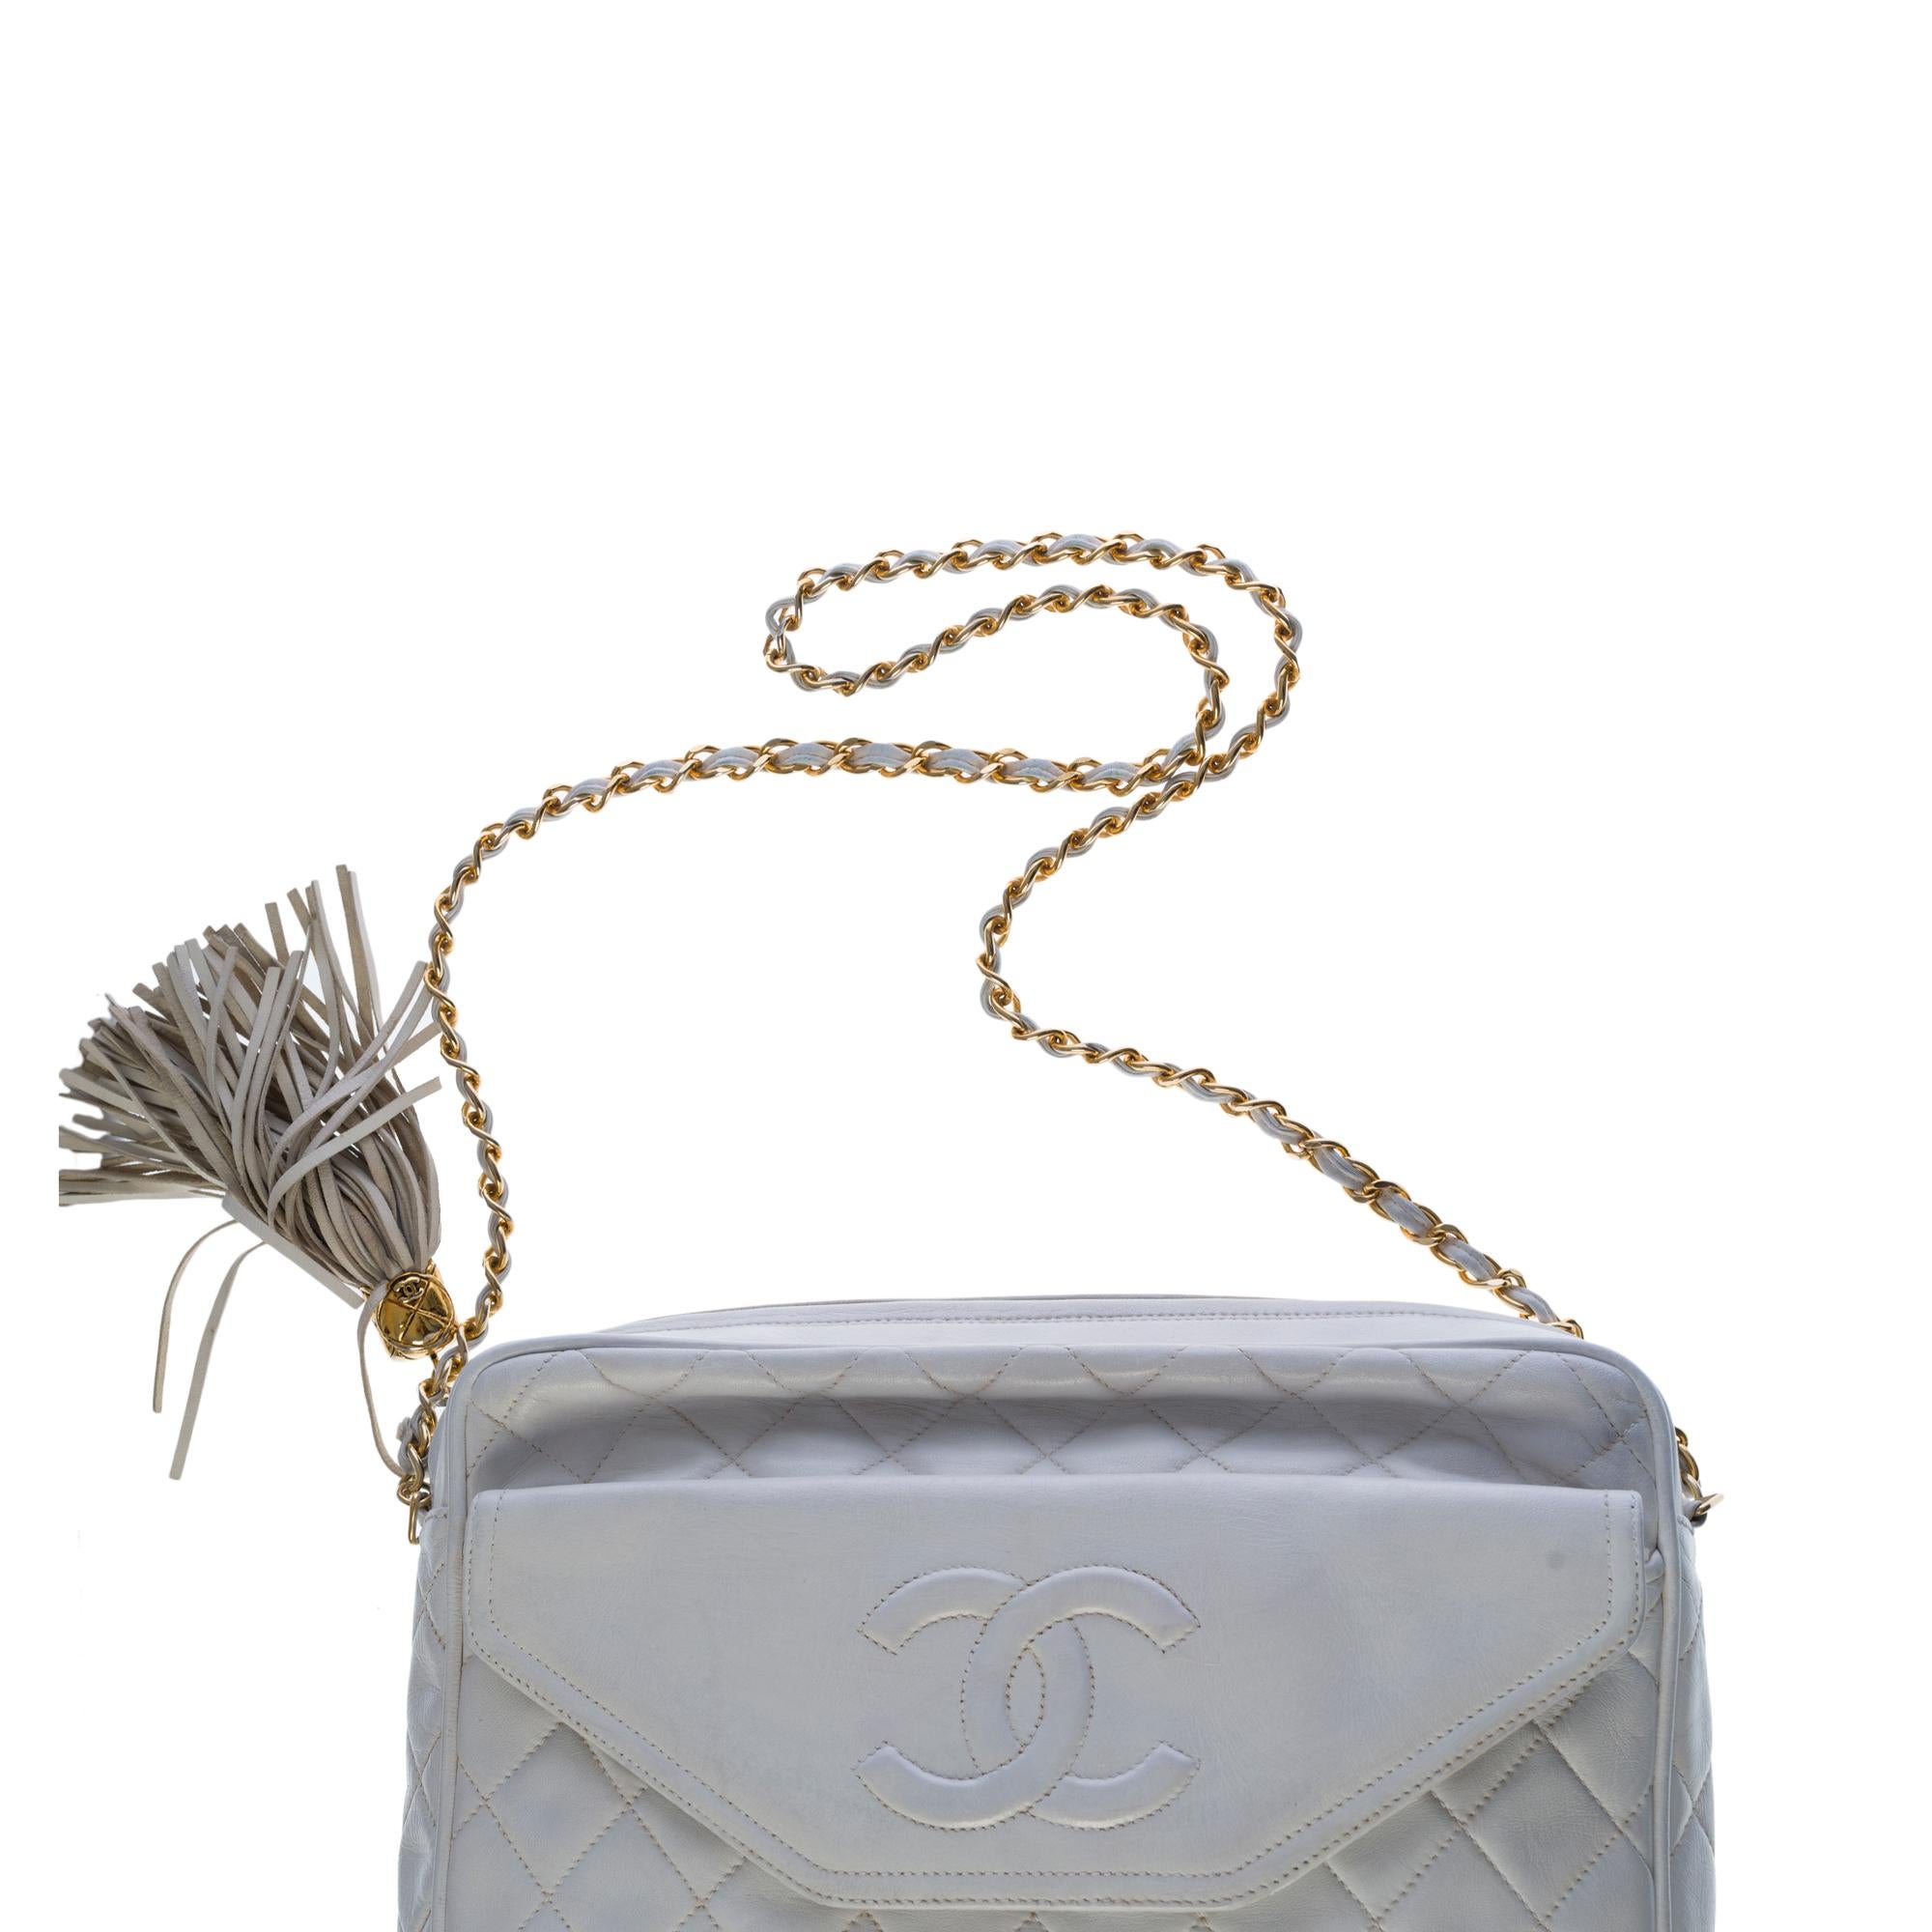 Amazing Chanel Camera shoulder bag in White quilted leather, GHW 3